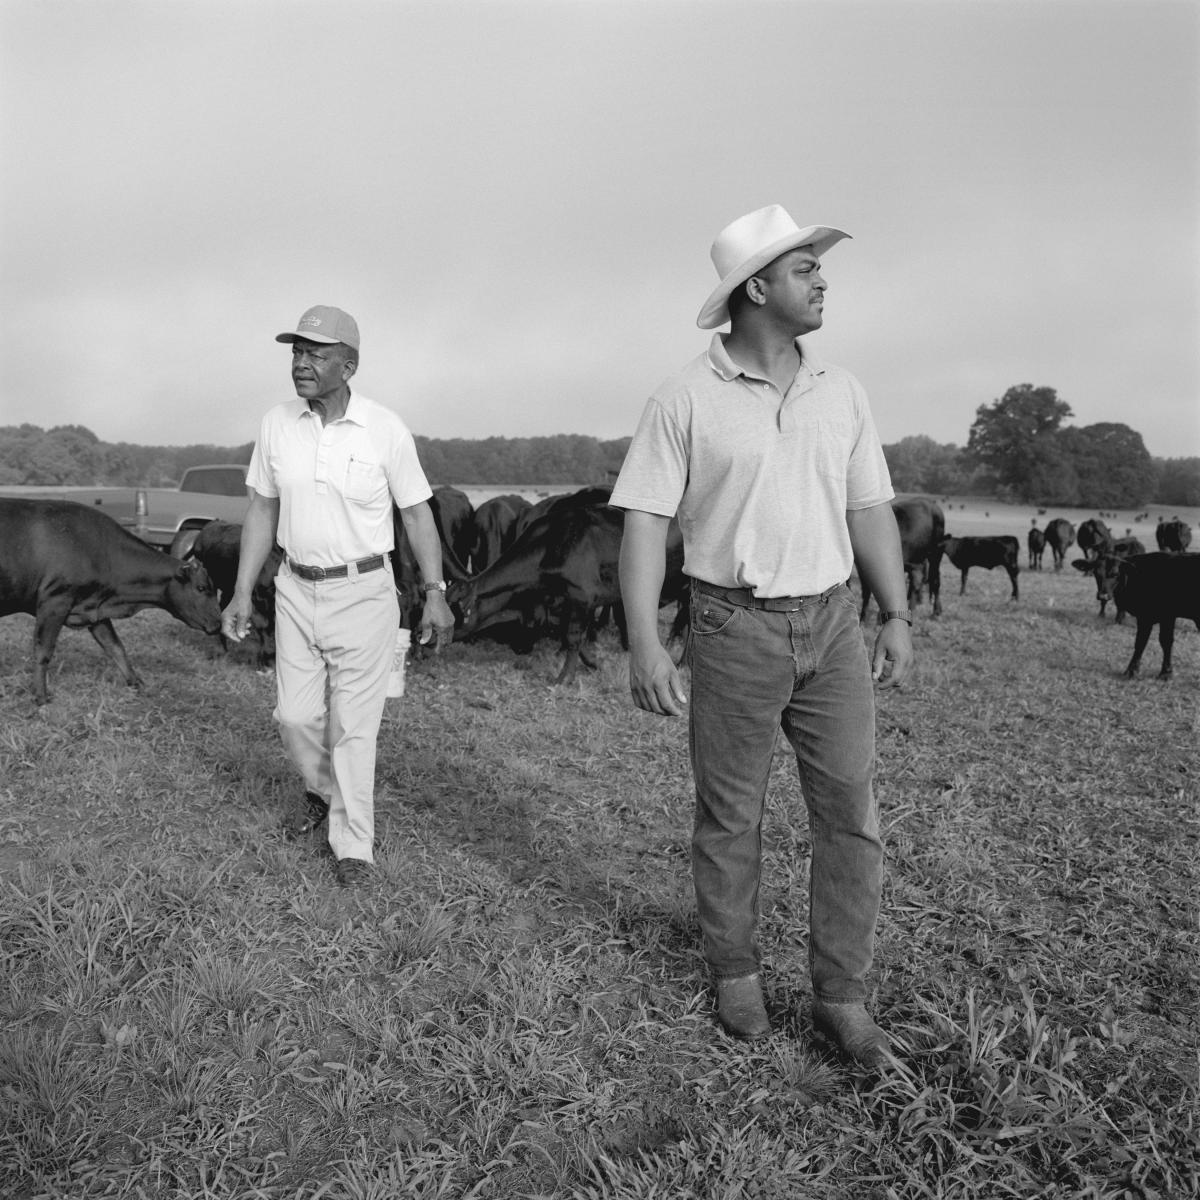 <p><center>Greene County, Alabama:</center></p>
Third-generation cattle farmer Harry Means and his son Donald walk through a pasture looking for one of their large breeding bulls that continues to break out of fenced spaces. Harry in his seventies can no longer control the 2,600 pound bull. They have been trying for days to herd the bull into a trailer for transport to the stockyards where it will be auctioned. : Images : AMERICAN BLACK FARMERS PROJECT - John Ficara